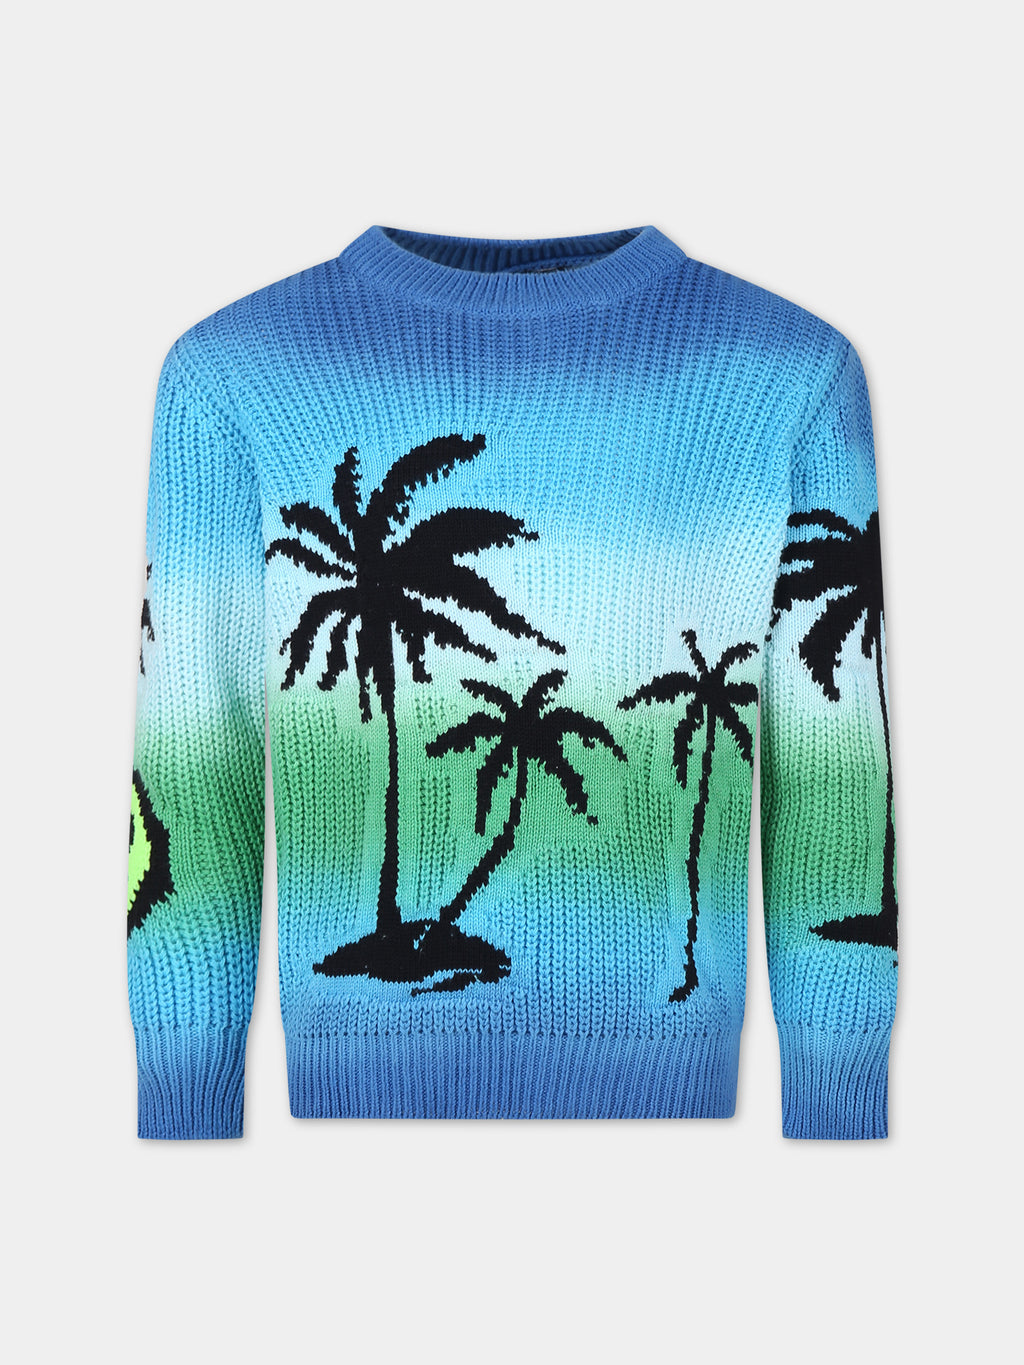 Light blue cotton sweater for kids with smiley and palm trees